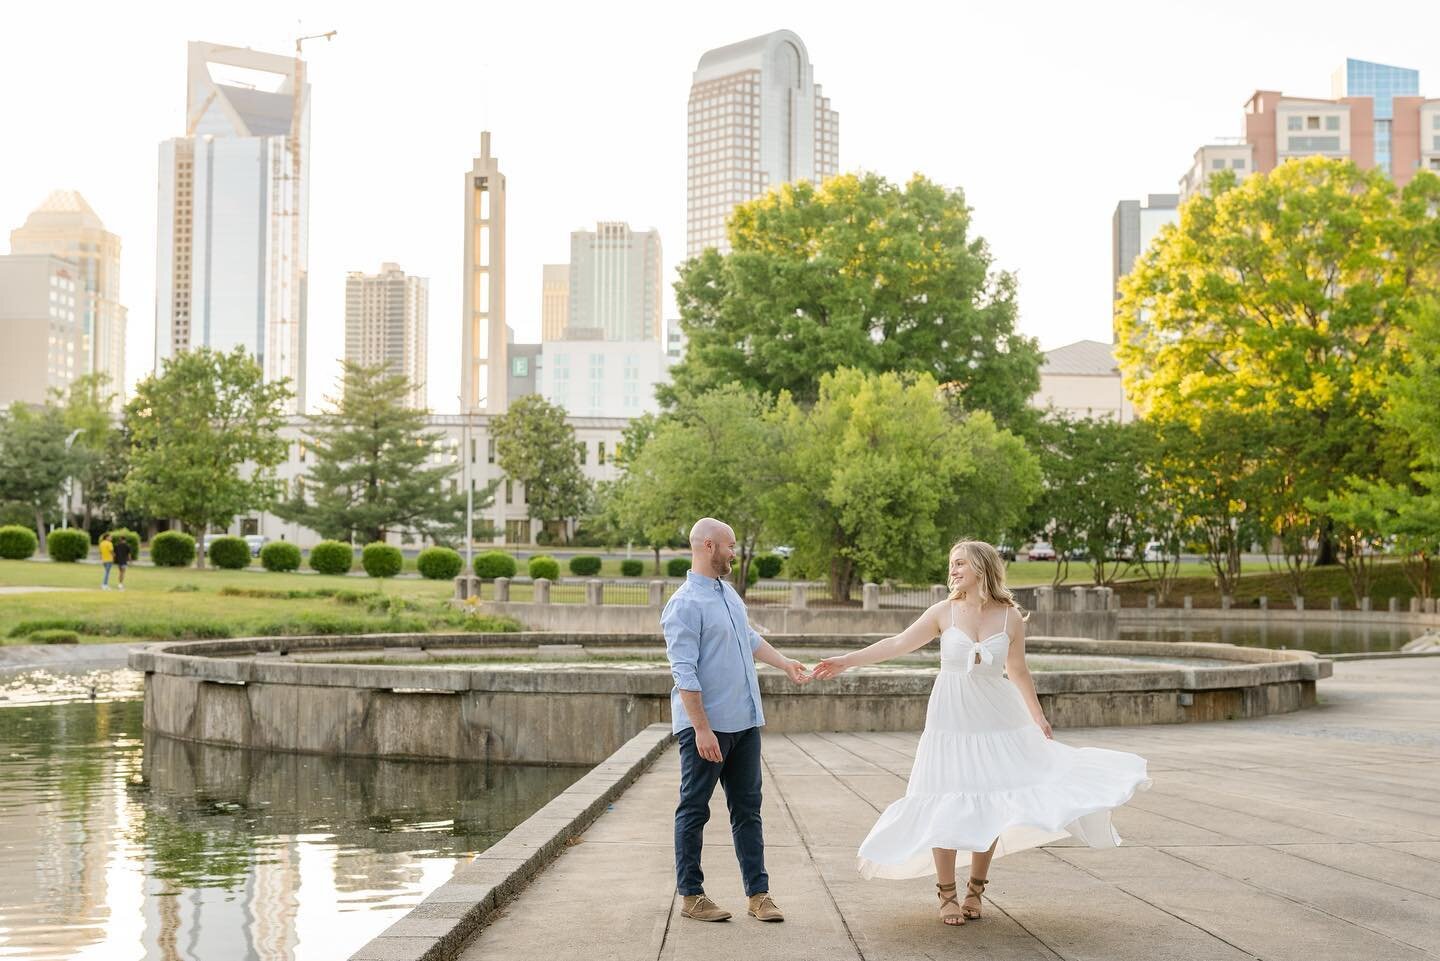 I truly cannot wait for this weekend&rsquo;s wedding to celebrate Shannon + Kevin! There&rsquo;s so much pretty event design coming! .
.
.
.
#weddingplanningcharlotte #jackiefogartieevents  #charlotteweddings #weddingplannercharlotte #charlotteweddin